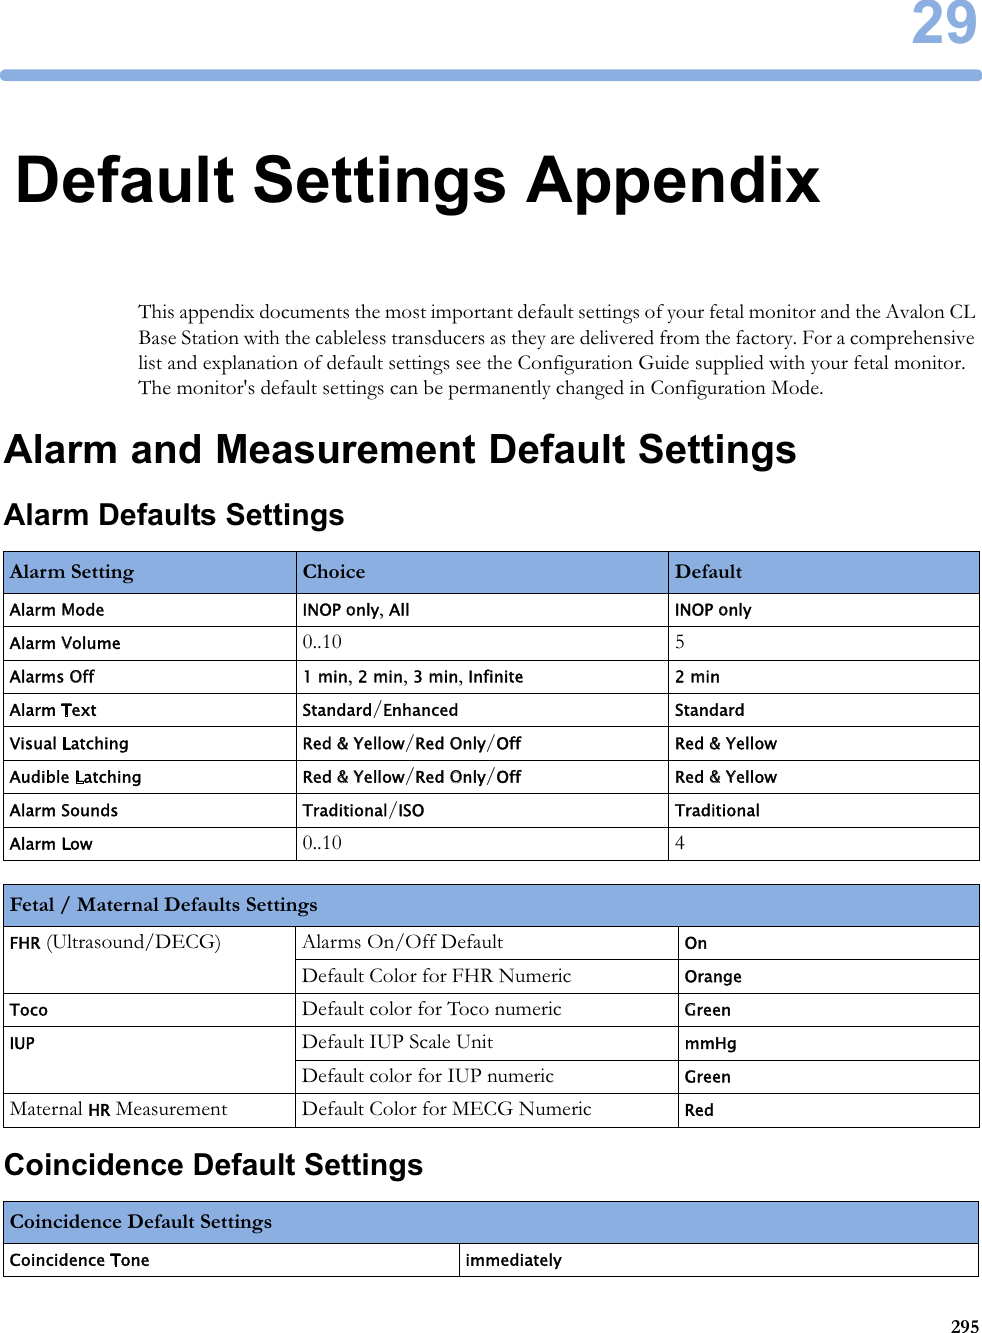 2929529Default Settings AppendixThis appendix documents the most important default settings of your fetal monitor and the Avalon CL Base Station with the cableless transducers as they are delivered from the factory. For a comprehensive list and explanation of default settings see the Configuration Guide supplied with your fetal monitor. The monitor&apos;s default settings can be permanently changed in Configuration Mode.Alarm and Measurement Default SettingsAlarm Defaults SettingsCoincidence Default SettingsAlarm Setting Choice DefaultAlarm Mode INOP only, All INOP onlyAlarm Volume 0..10 5Alarms Off 1 min, 2 min, 3 min, Infinite 2 minAlarm Text Standard/Enhanced StandardVisual Latching Red &amp; Yellow/Red Only/Off Red &amp; YellowAudible Latching Red &amp; Yellow/Red Only/Off Red &amp; YellowAlarm Sounds Traditional/ISO TraditionalAlarm Low 0..10 4Fetal / Maternal Defaults SettingsFHR (Ultrasound/DECG) Alarms On/Off Default OnDefault Color for FHR Numeric OrangeToco Default color for Toco numeric GreenIUP Default IUP Scale Unit mmHgDefault color for IUP numeric GreenMaternal HR Measurement Default Color for MECG Numeric RedCoincidence Default SettingsCoincidence Tone immediately